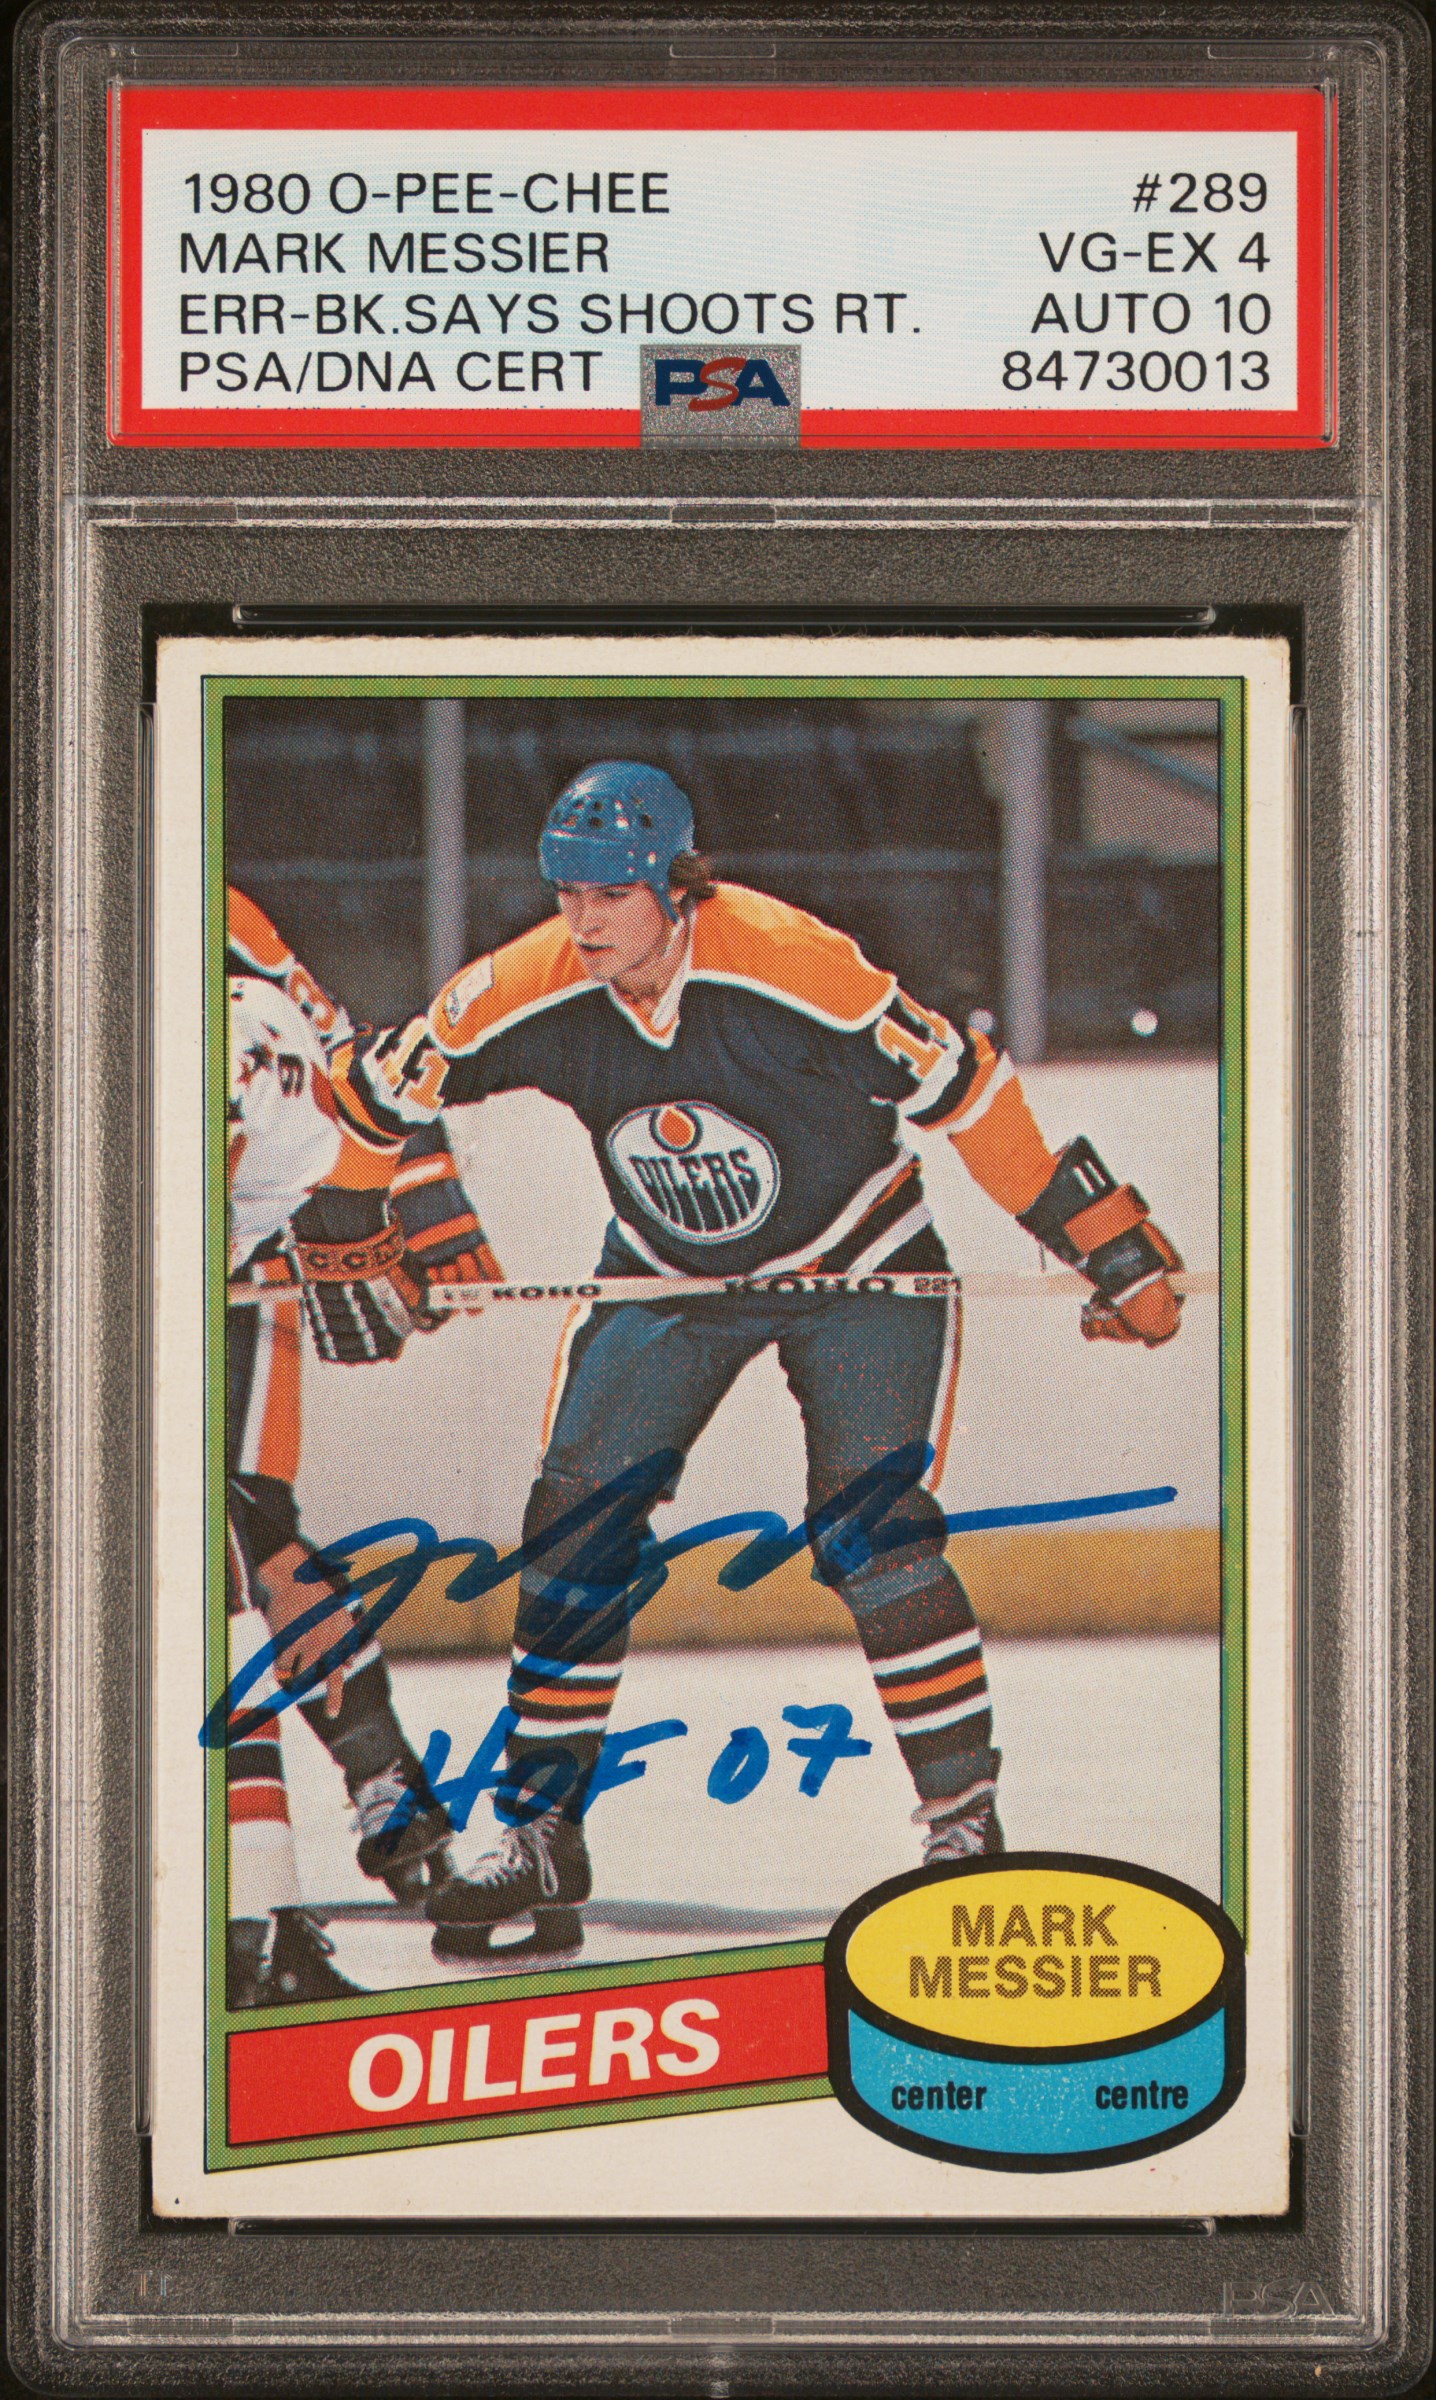 Mark Messier 1980 O-Pee-Chee Signed Rookie Card #289 Auto Graded PSA 10 84730013